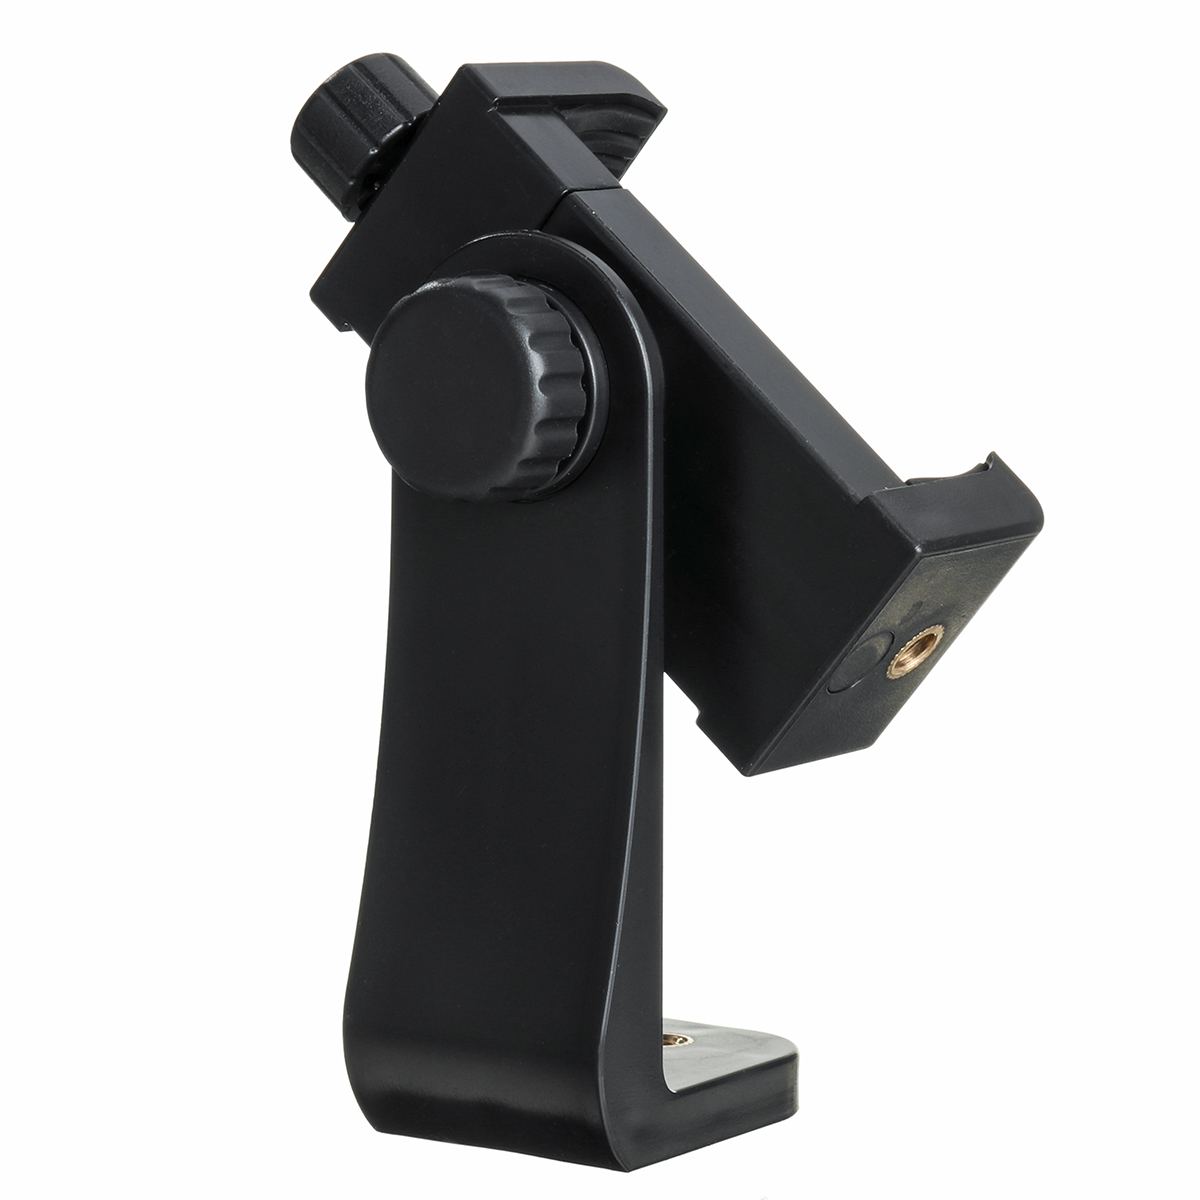 Universal-360-Degree-Rotating-Cell-Phone-Holder-Clip-with-14-inch-Screw-Holes-Fit-Tripod-Monopod-Sel-1688711-10